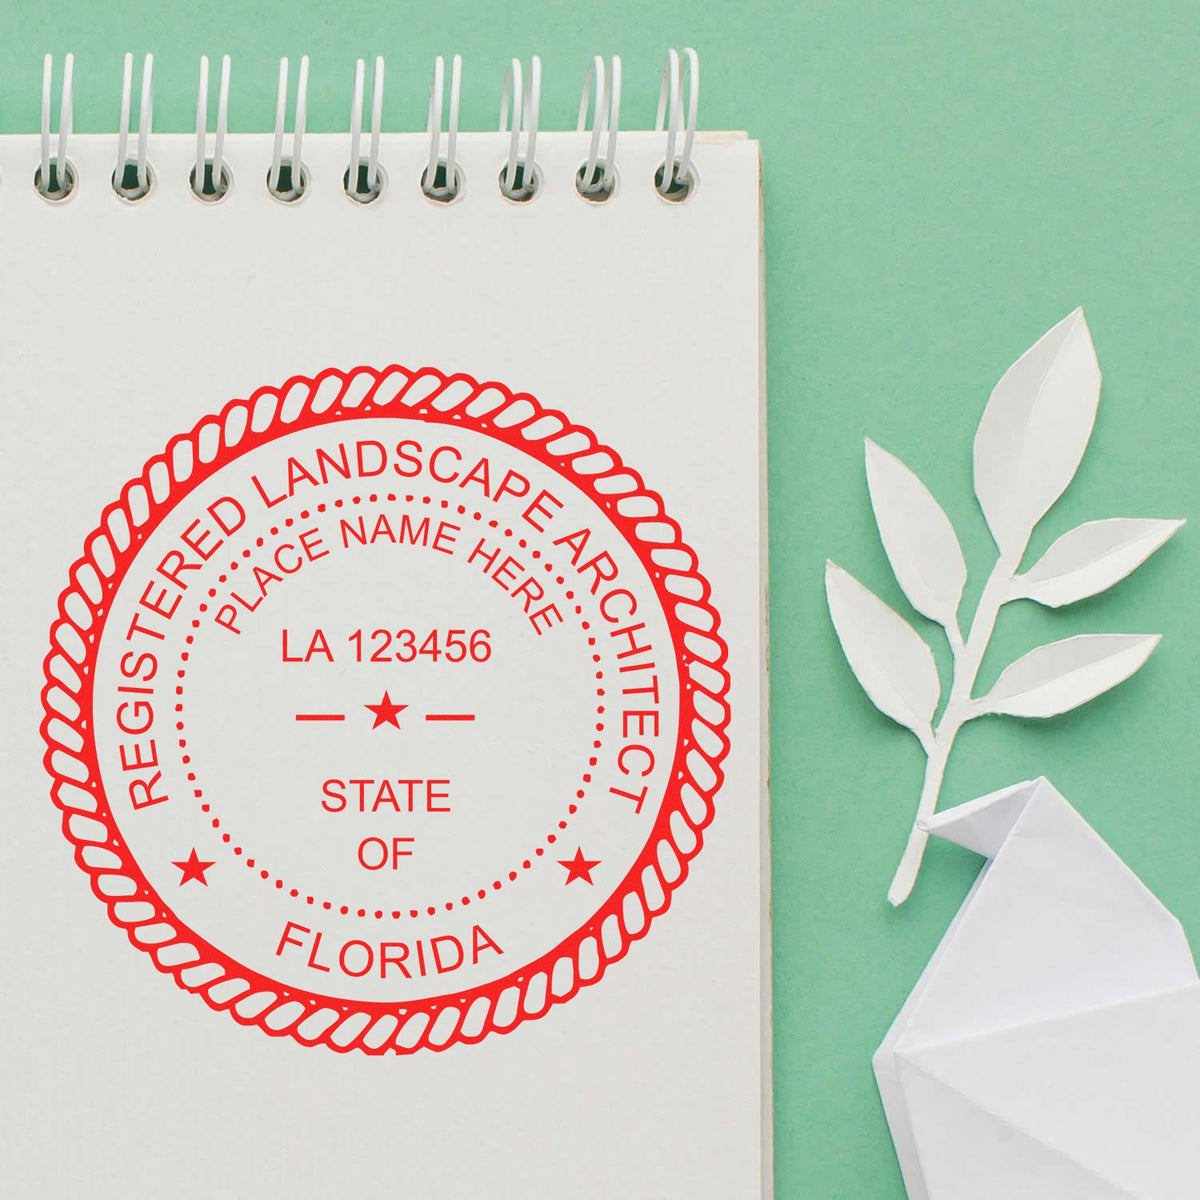 The Florida Landscape Architectural Seal Stamp stamp impression comes to life with a crisp, detailed photo on paper - showcasing true professional quality.